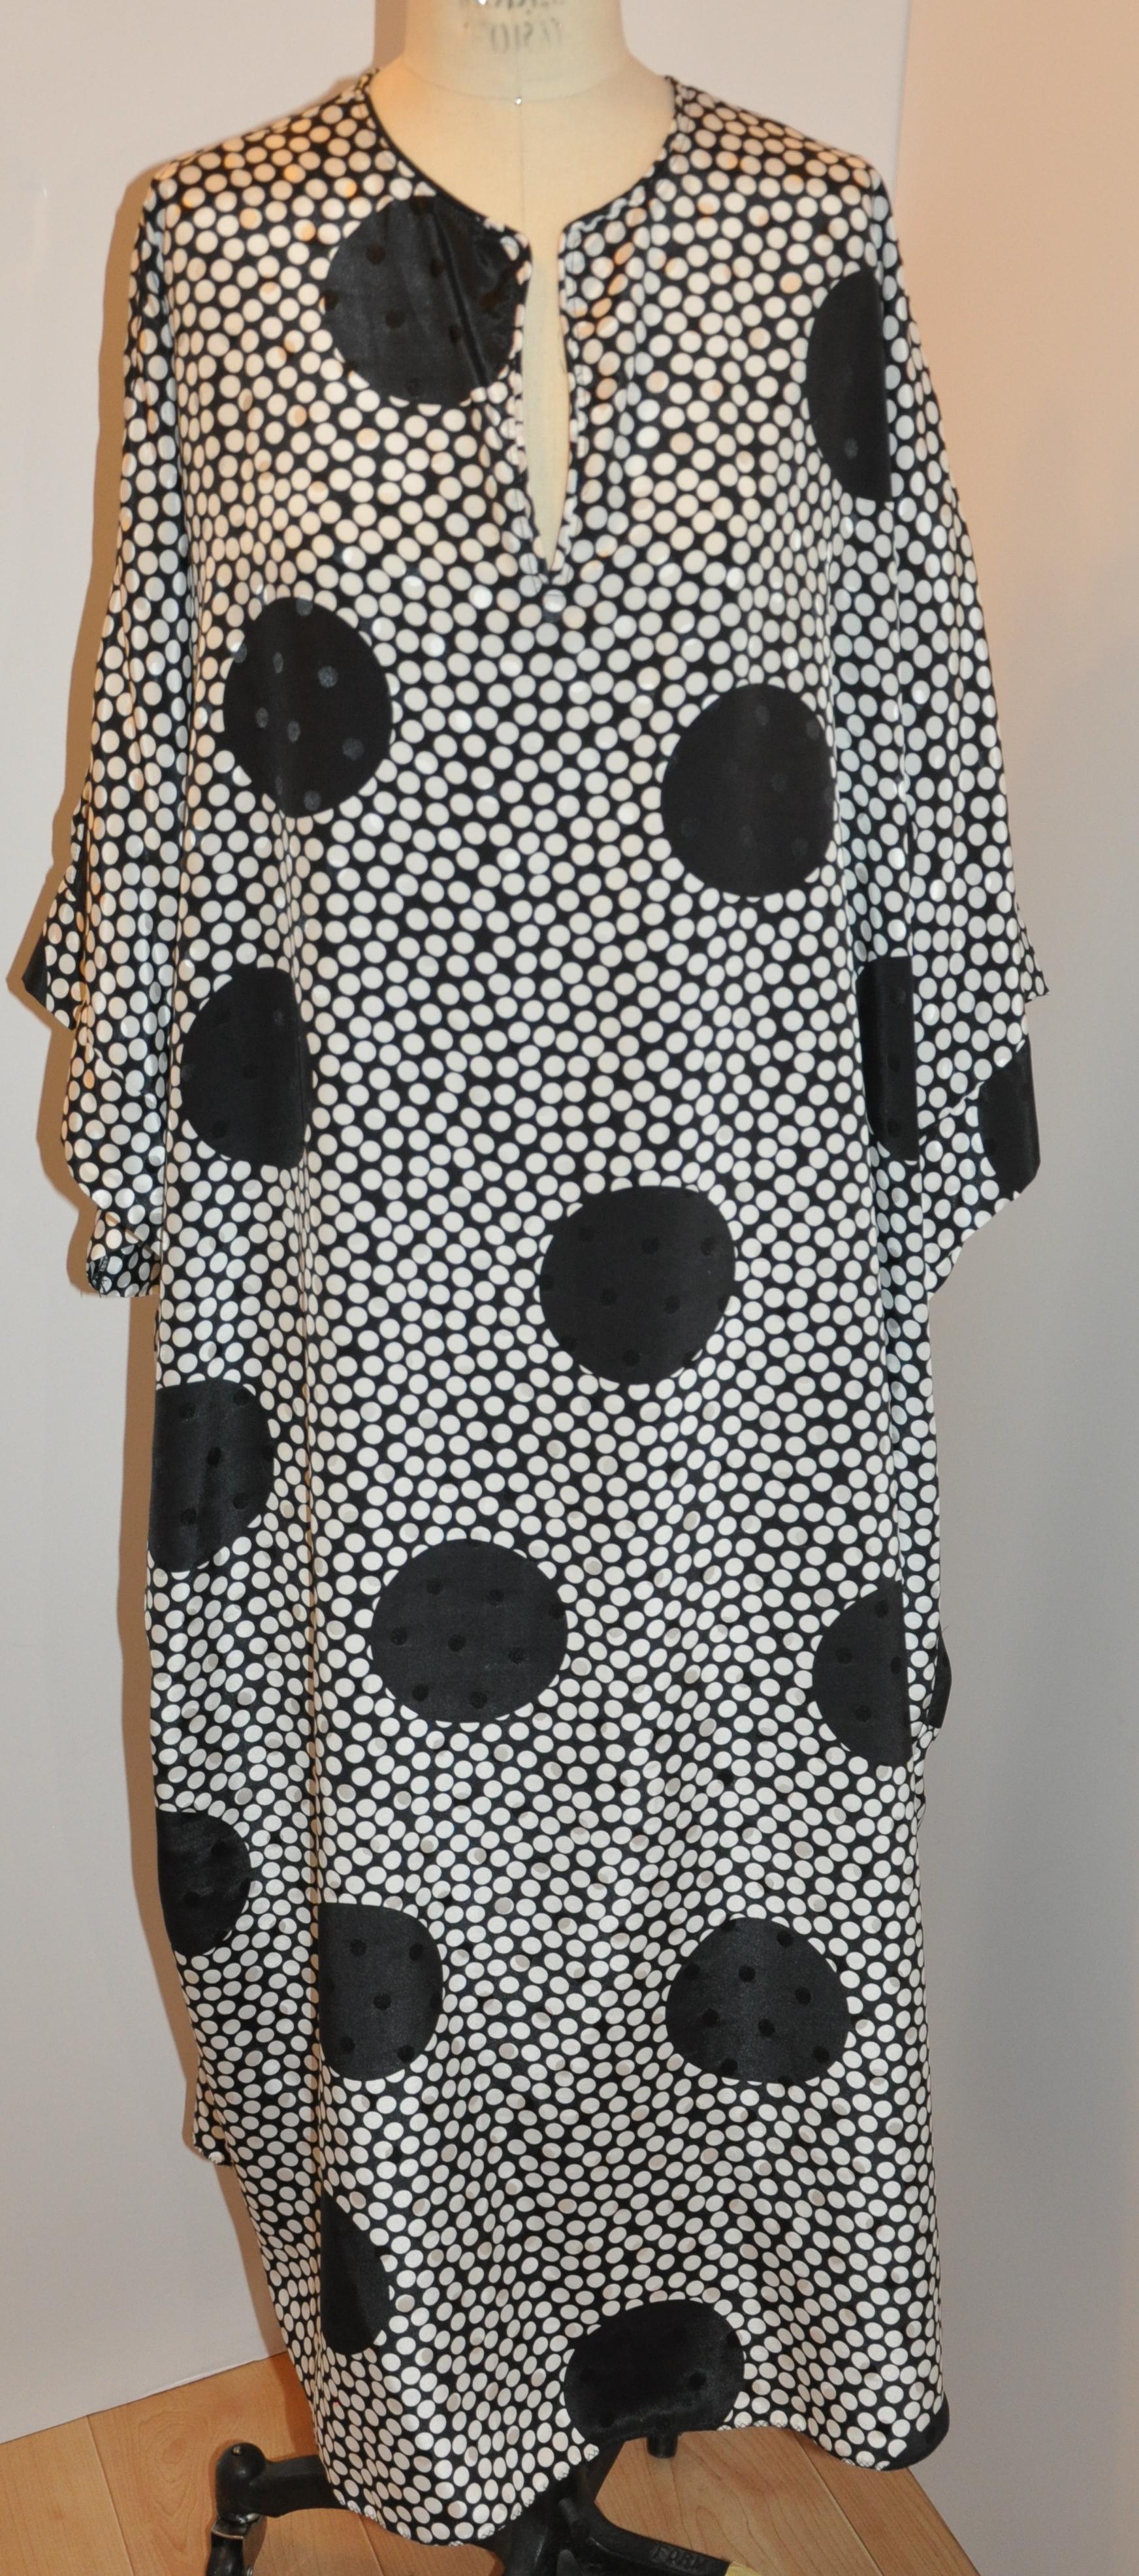        This wonderfully whimsical Oscar de la Renta for Swirl black and white bold abstract multi-size polka dot with kimono-style sleeves silk caftan-style pullover maxi dress can be worn free-form, or with a tailored belt. The front's length